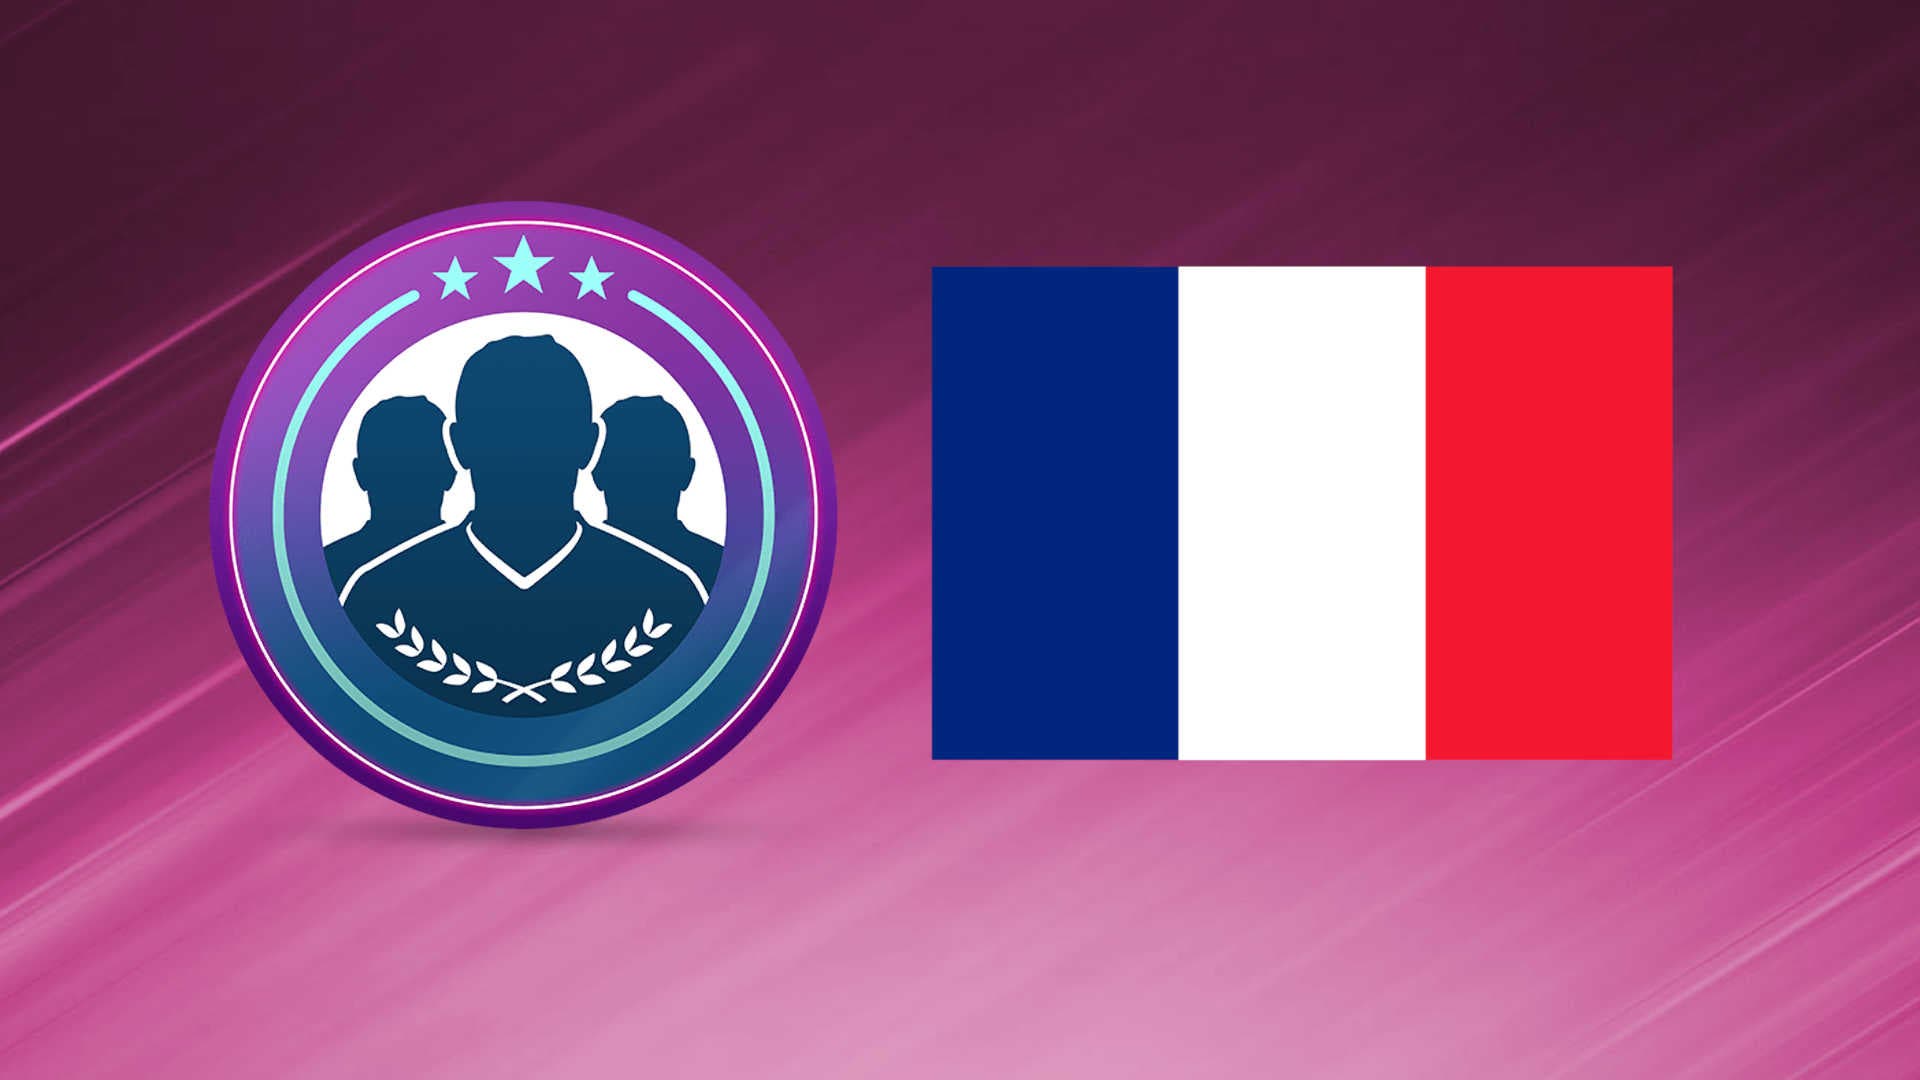 FIFA 23: This French player would appear in Fantasy FUT SBC according to a leak